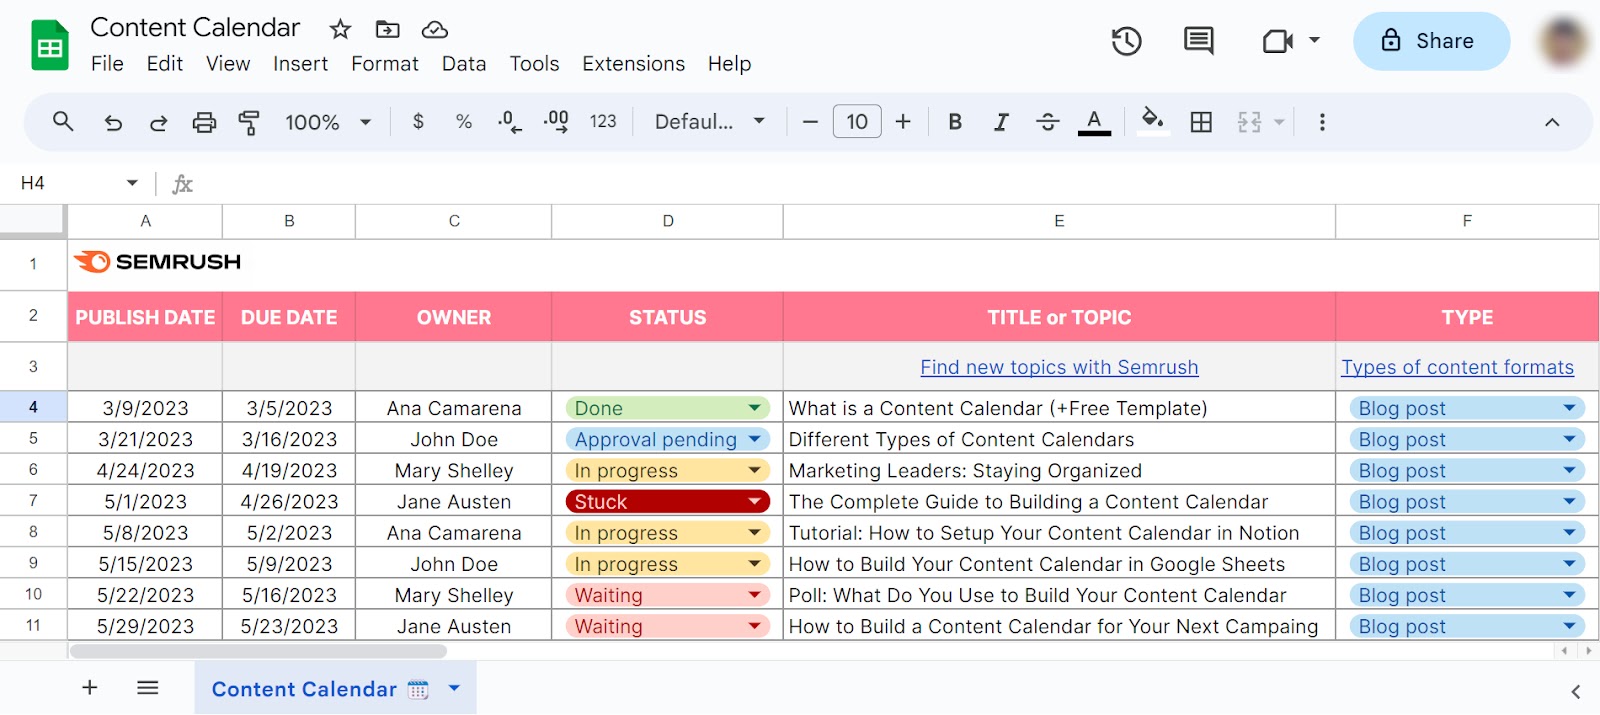 Content calendar template showing publish ****, due ****, owner, status, title/topic, and type.